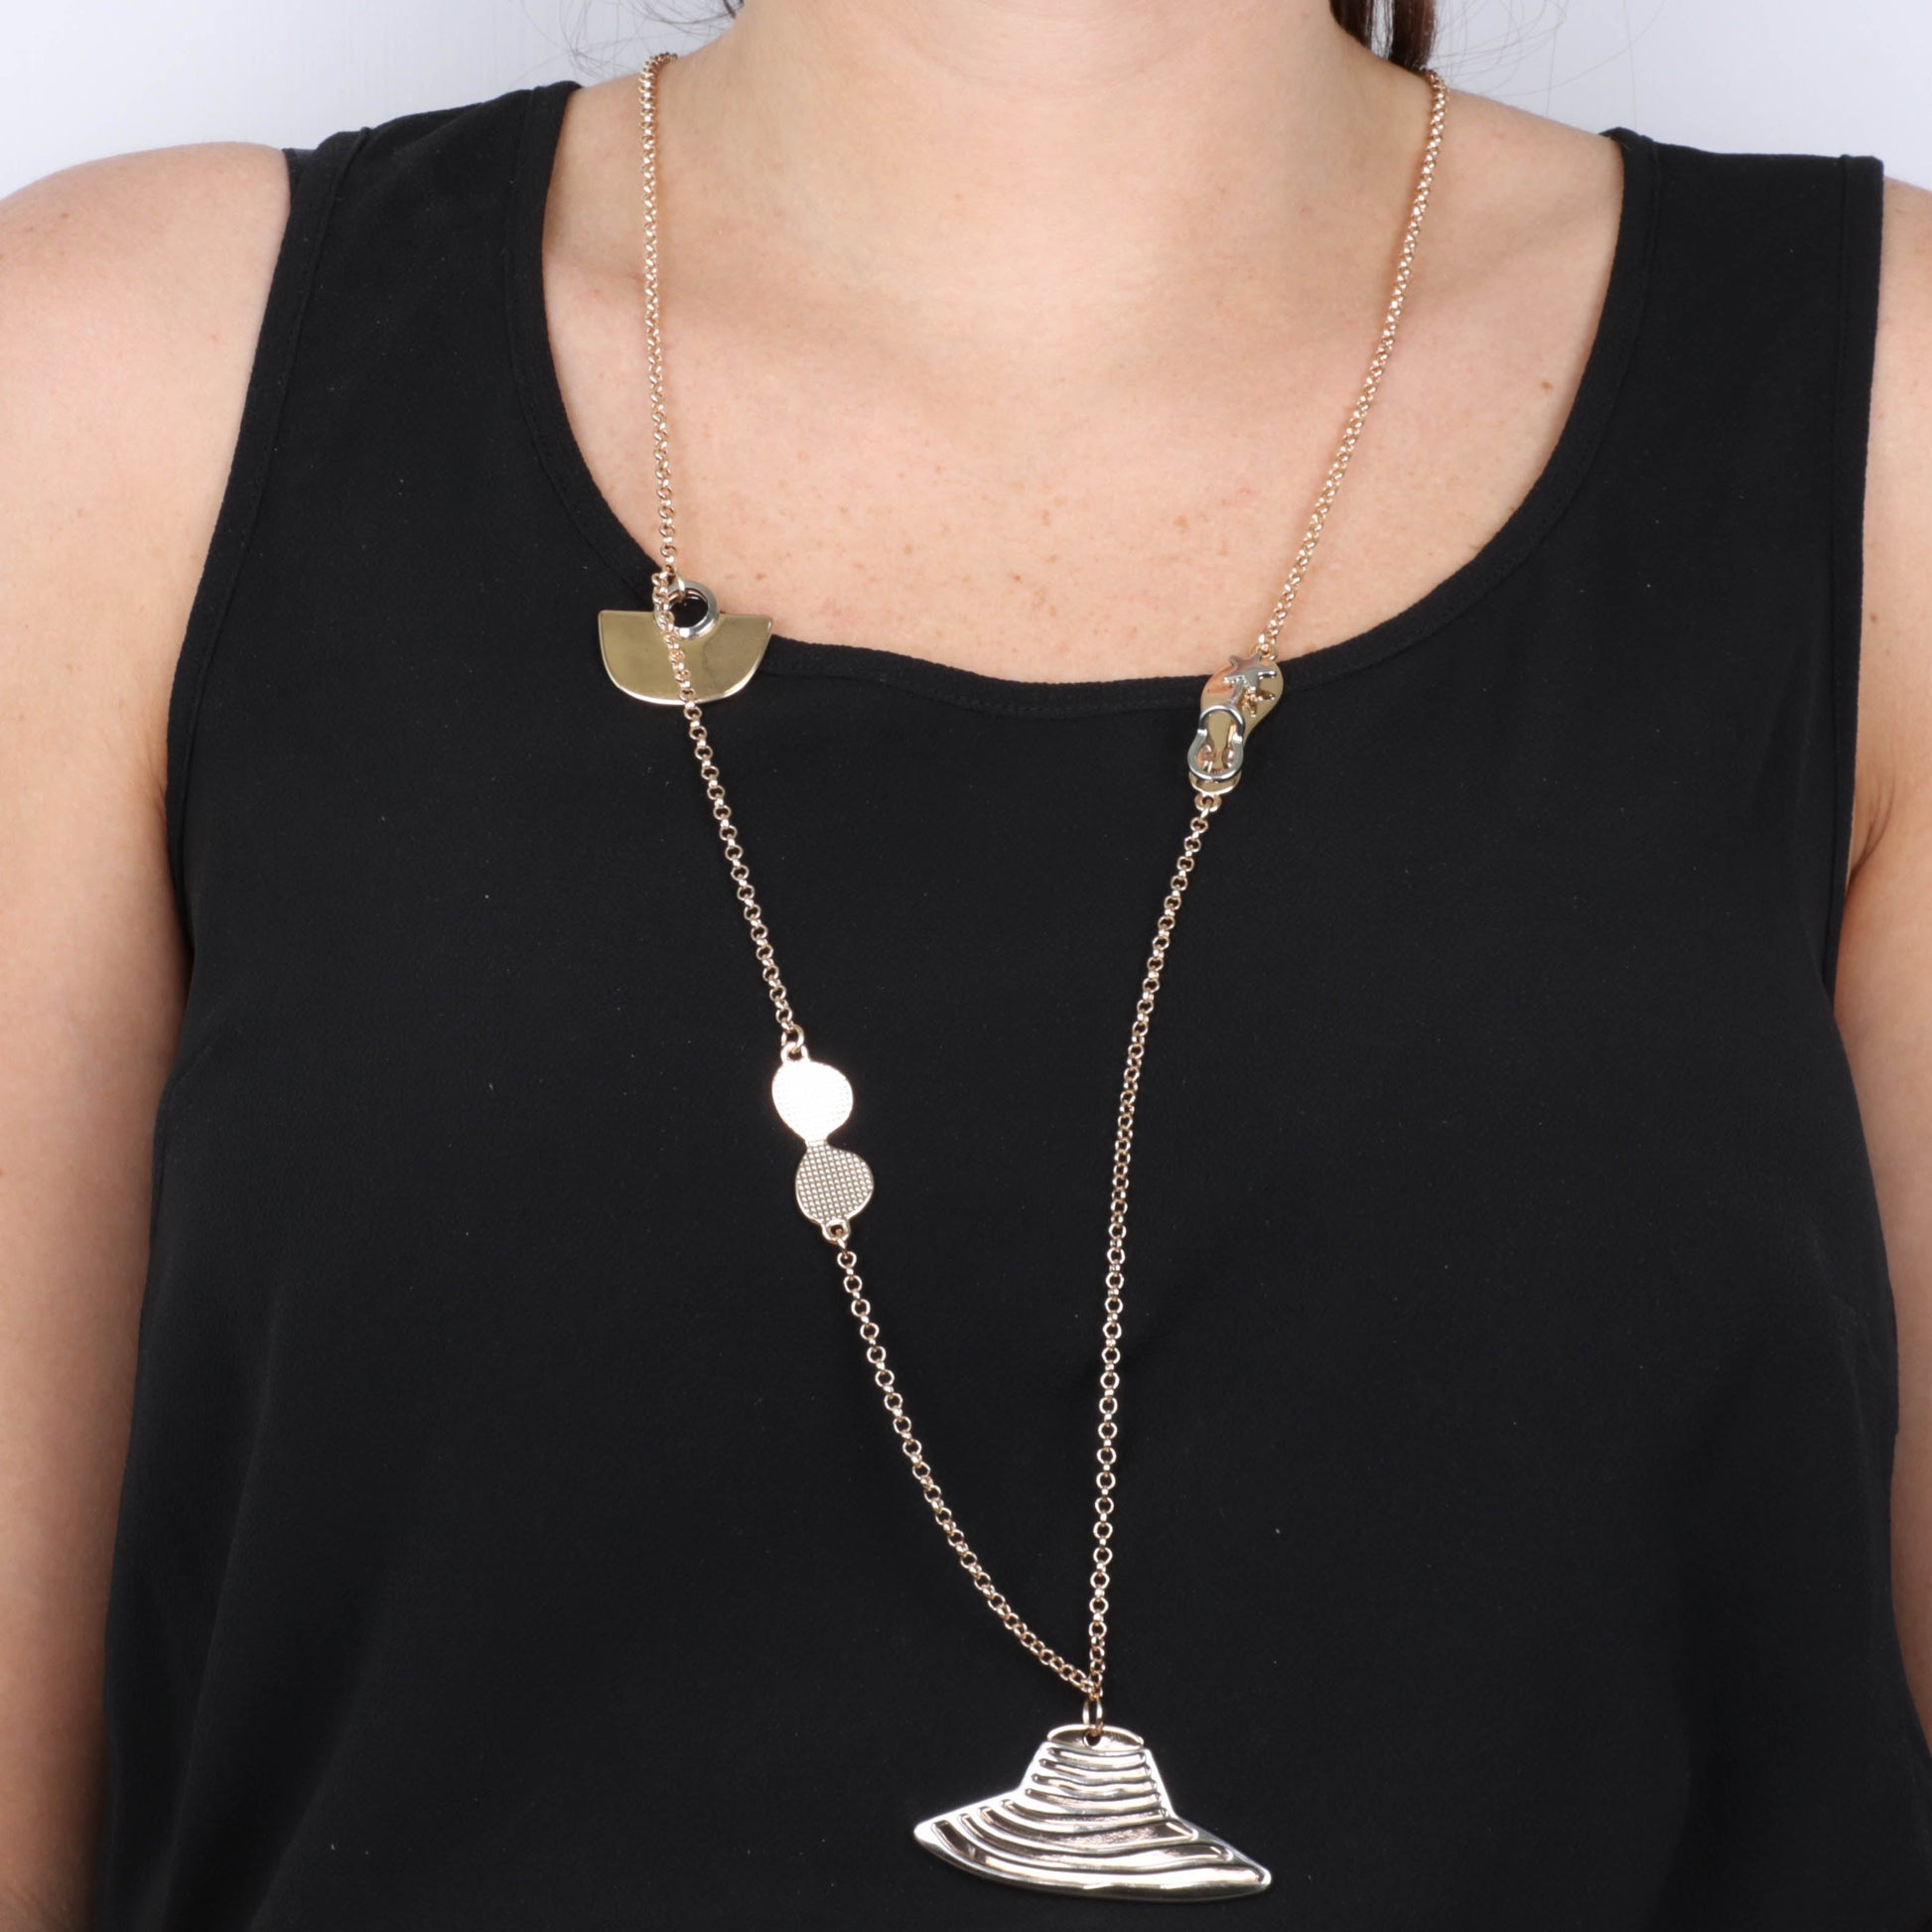 Long metal necklace with two -tone summer hat pendant